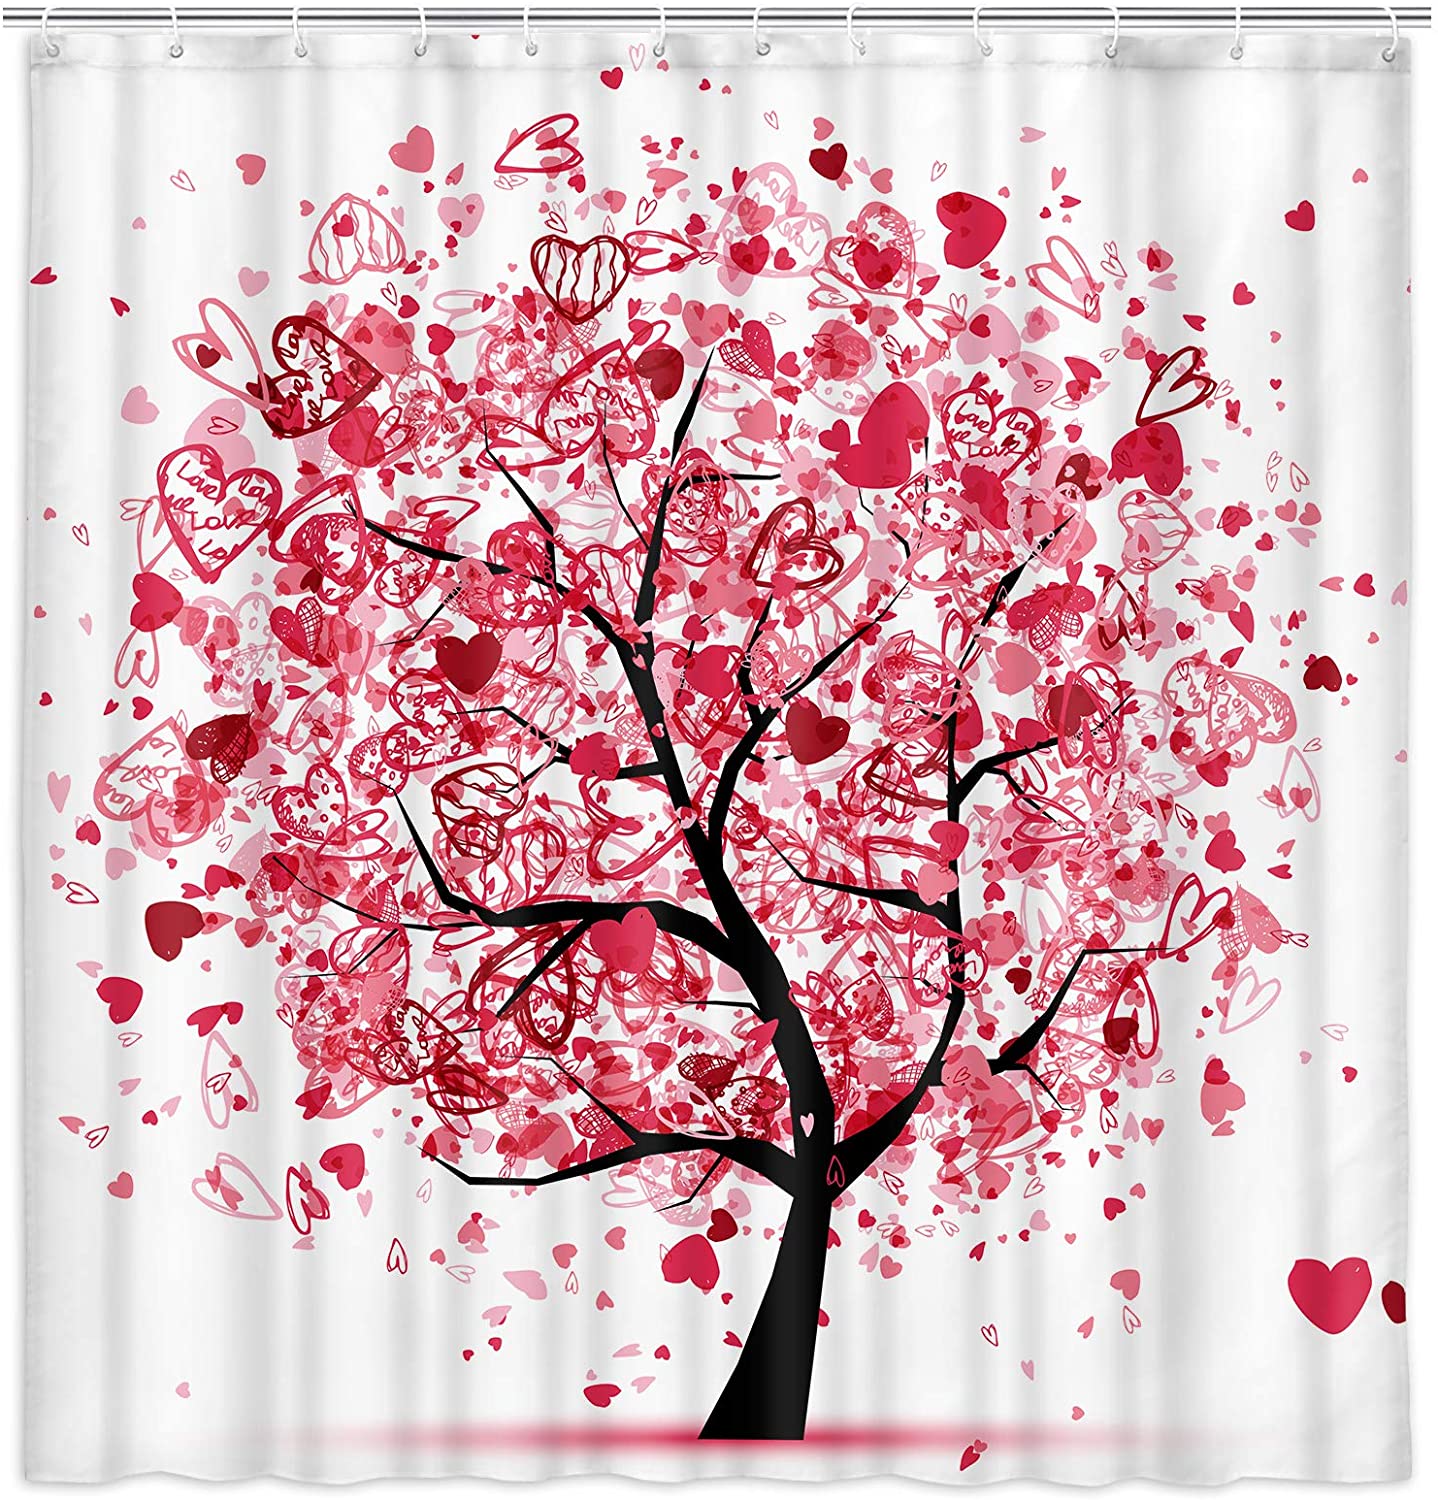 Leading Manufacturer for Digital Printing Cushion Cover - Tree of Life Shower Curtain for Bathroom Valentines Tree with Pink Hearts Doodles Decorated Shower Curtain Fabric Bathroom Curtain –...